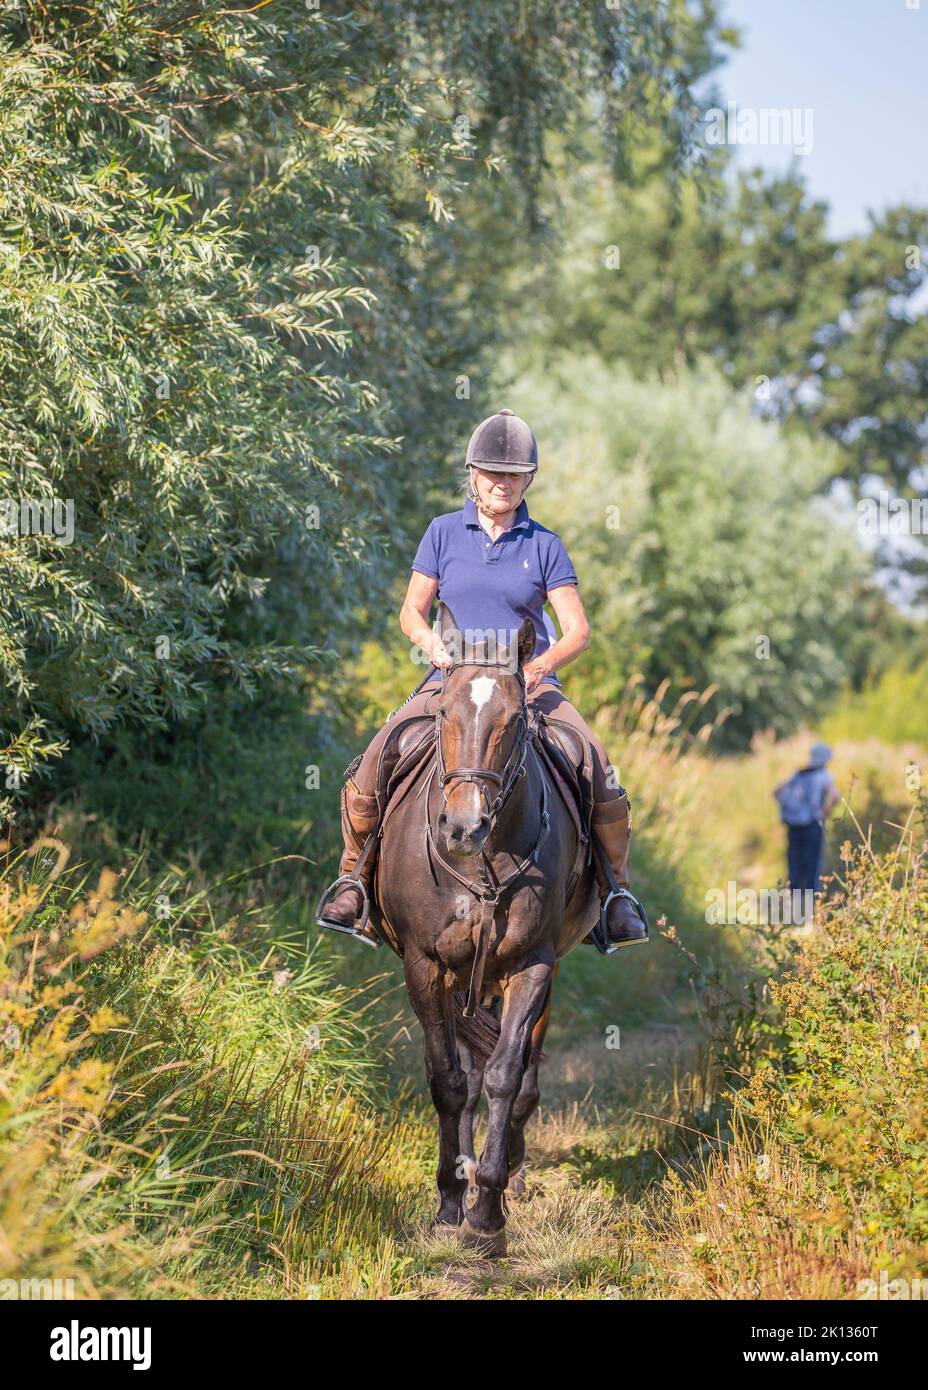 Front view of a lady riding a horse along a country path, bridleway on a hot summer day. Stock Photo